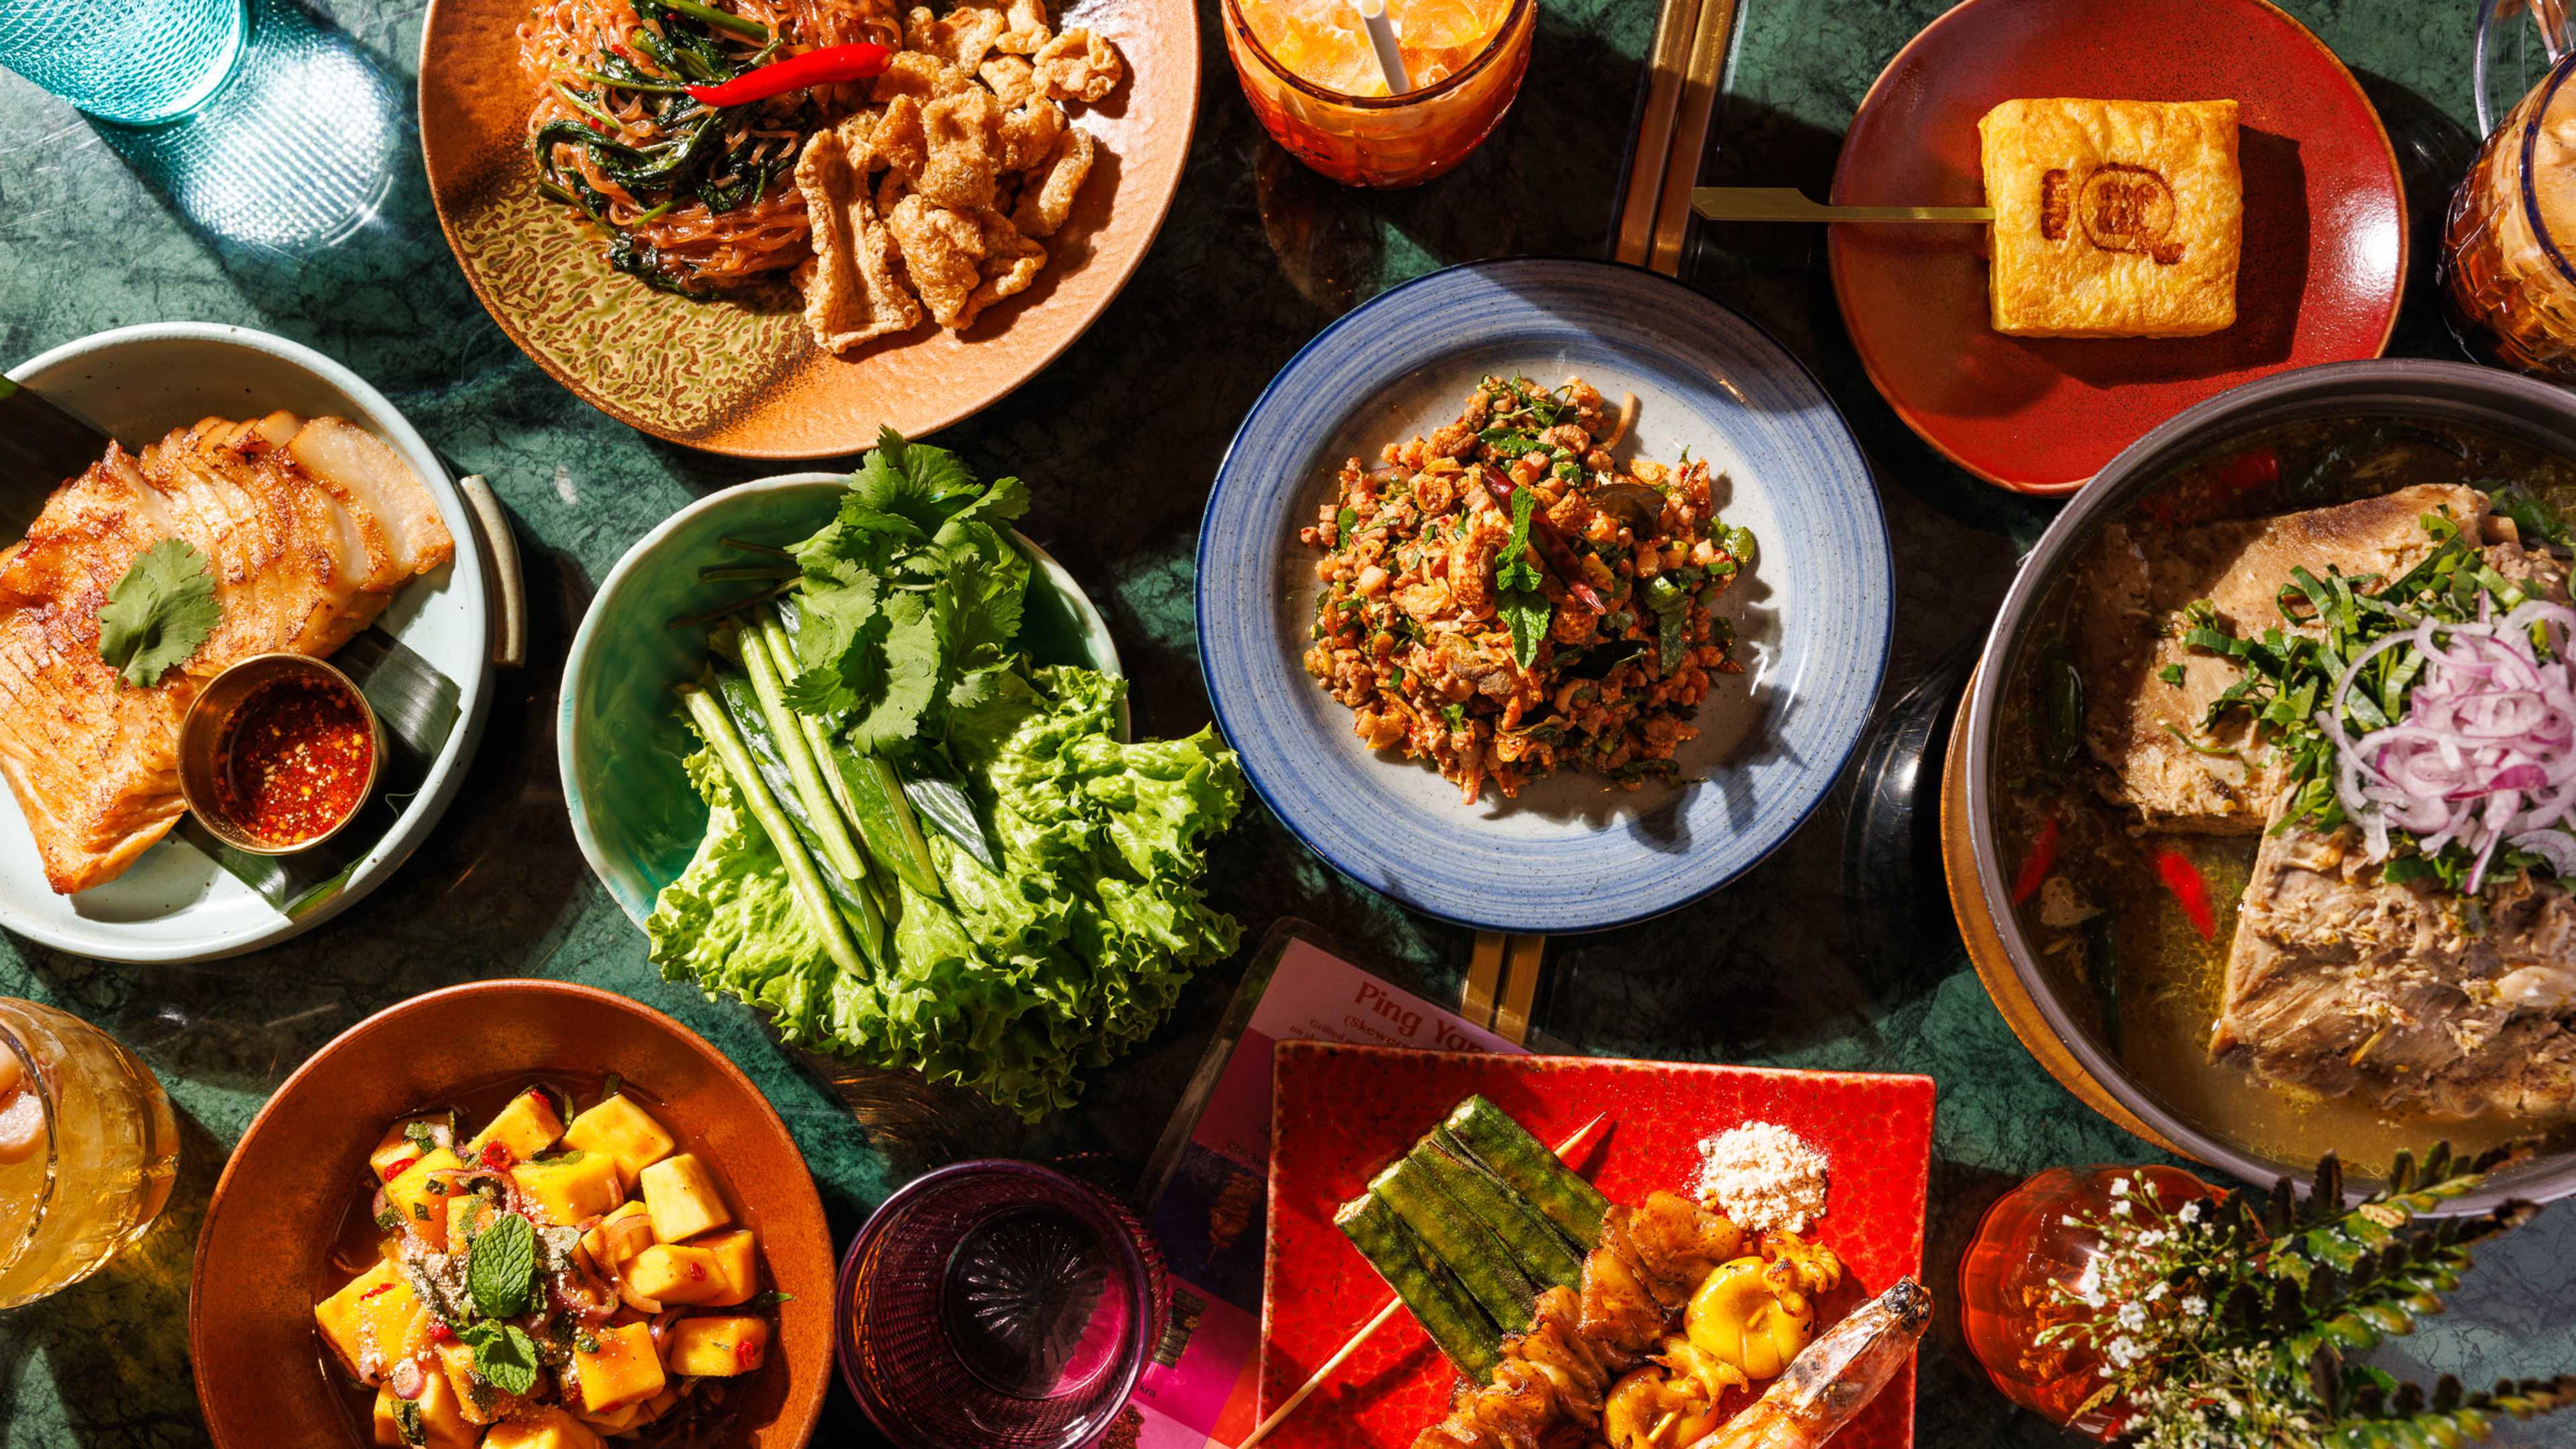 a spread of thai dishes from sappe, including some grilled skewers, a curry, a laab, and a noodle dish